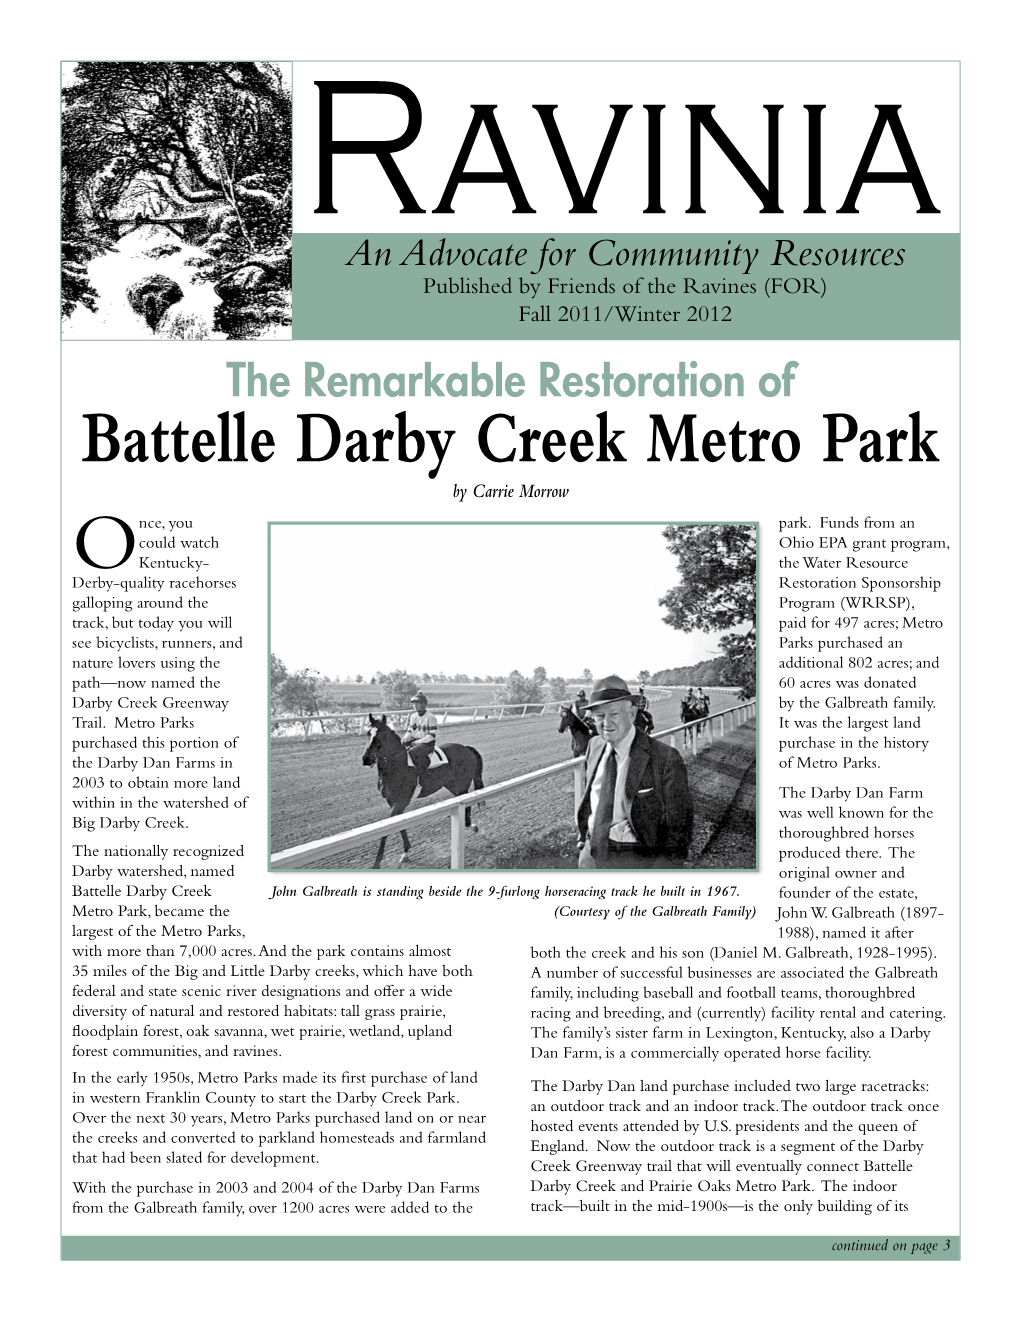 Battelle Darby Creek Metro Park by Carrie Morrow Nce, You Park